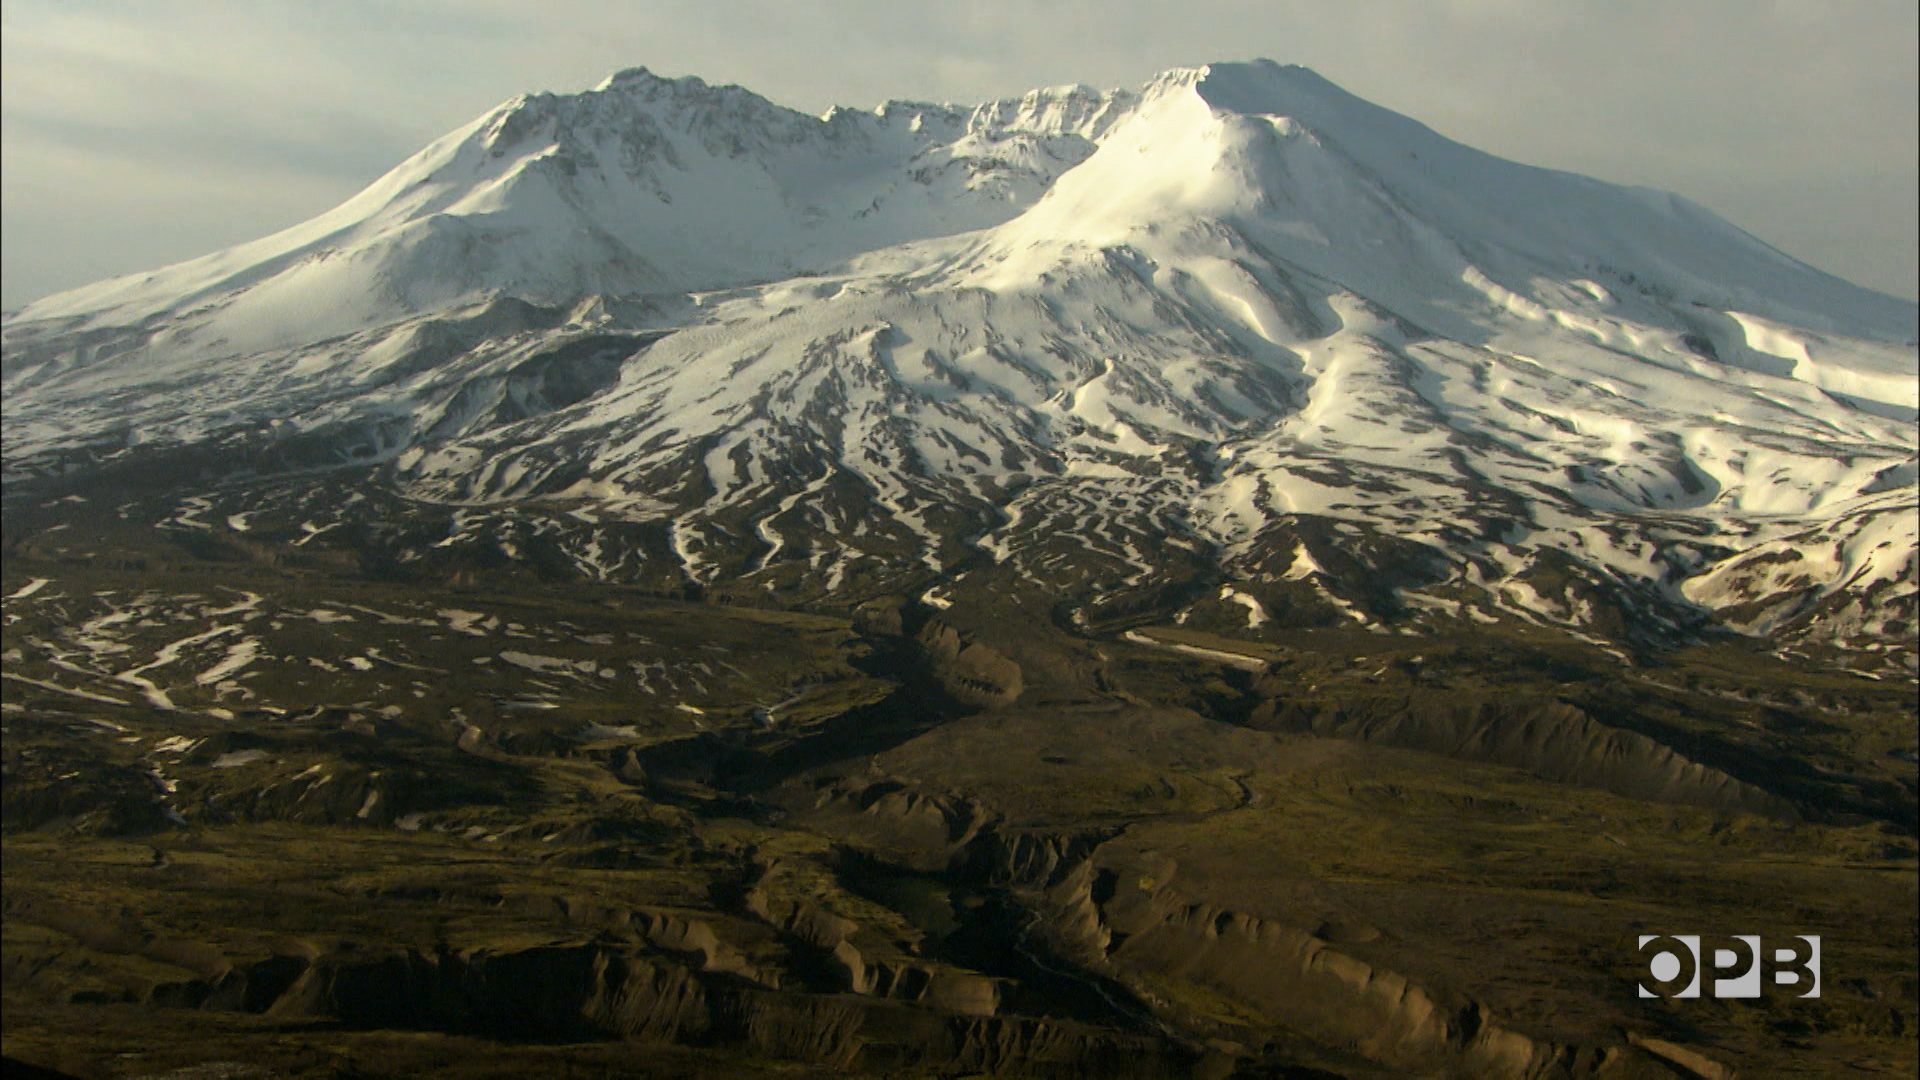 A Mount St Helens Ecologist Spent His Life Researching The